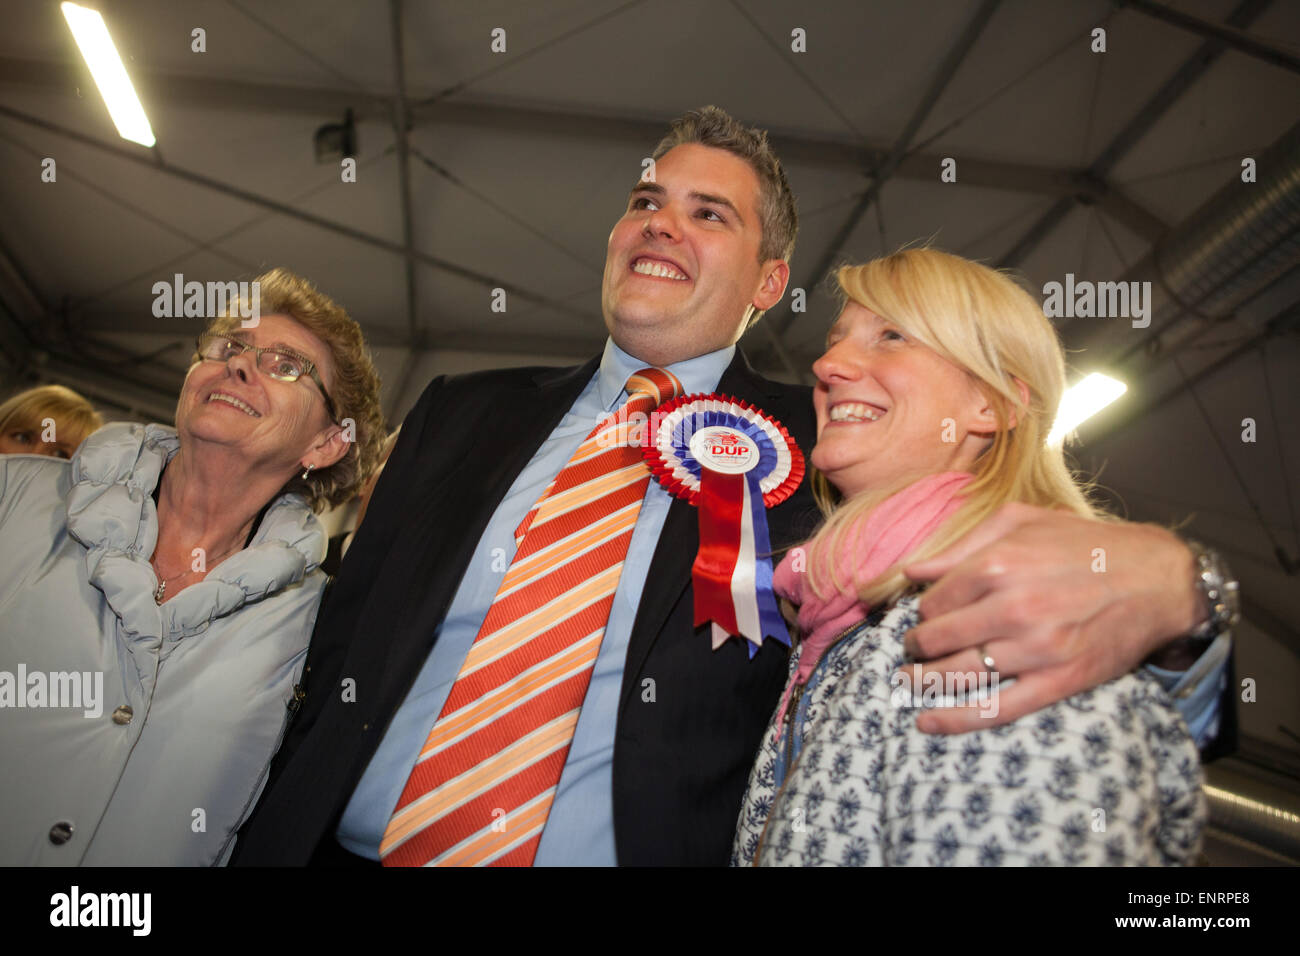 Belfast UK. 7th May 2015 General Election:  Gavin Robinson from the Democratic Unionist Party (DUP) with wife Linsey after winni Stock Photo